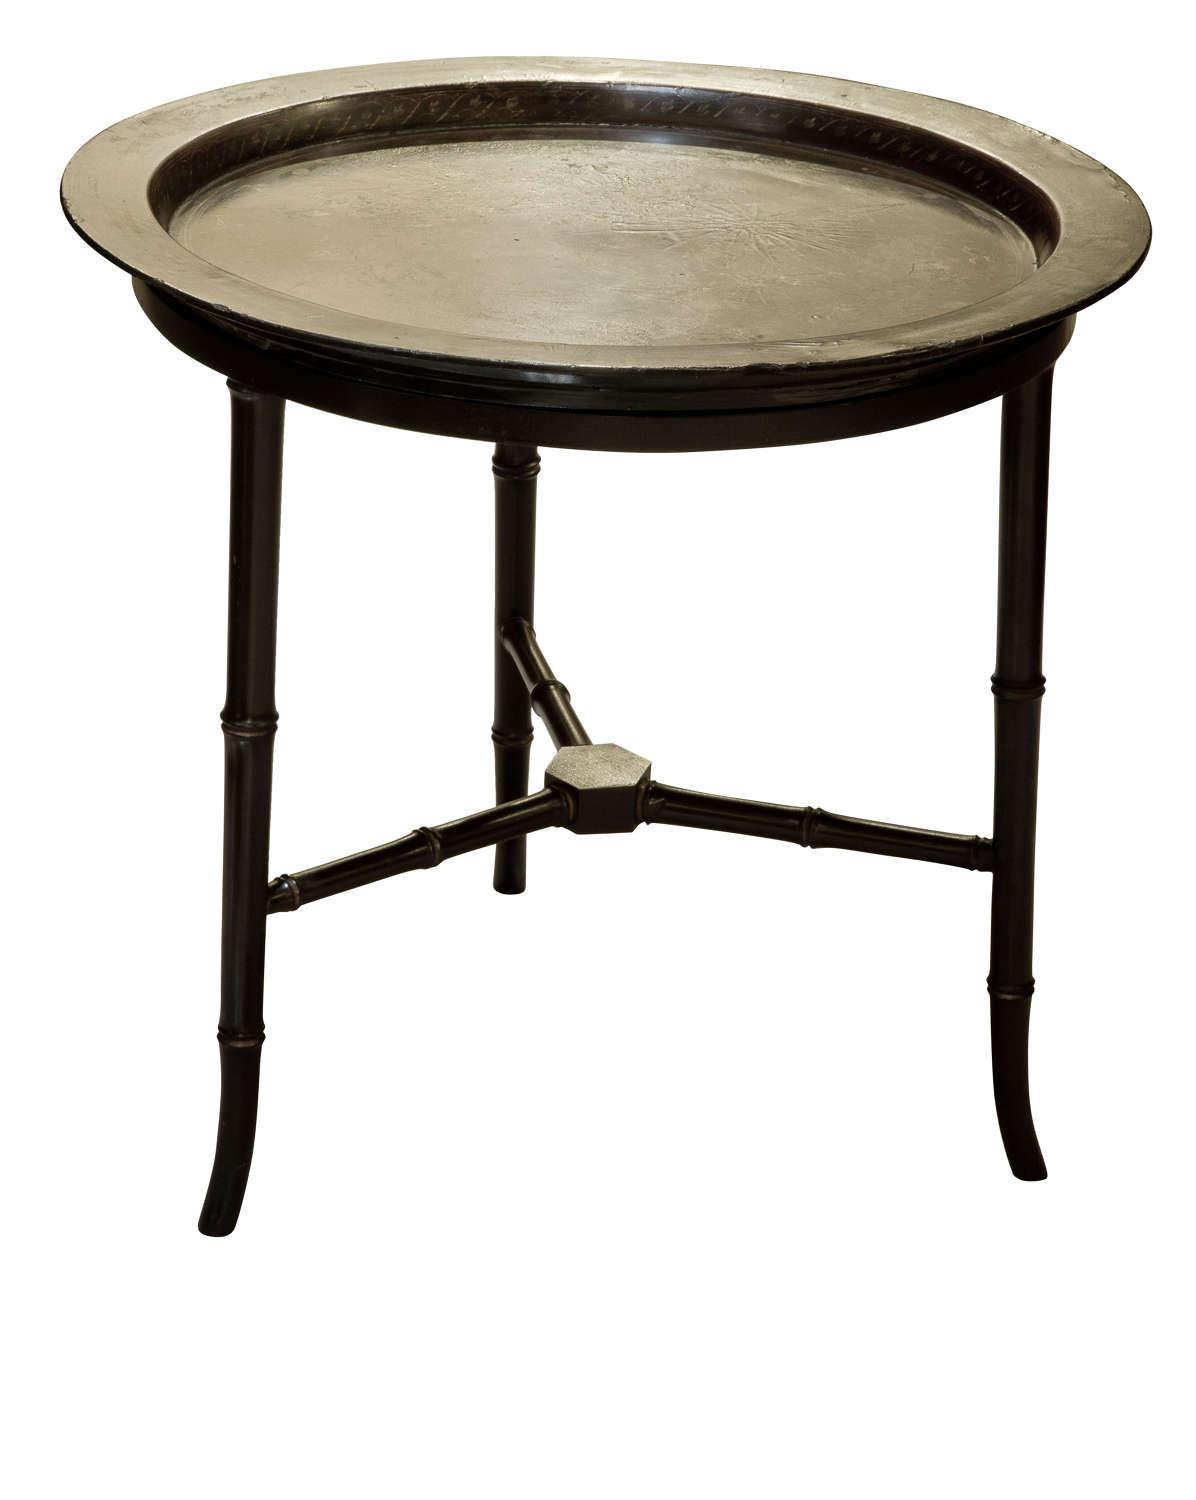 A Japaned Lacquered Occasional Table